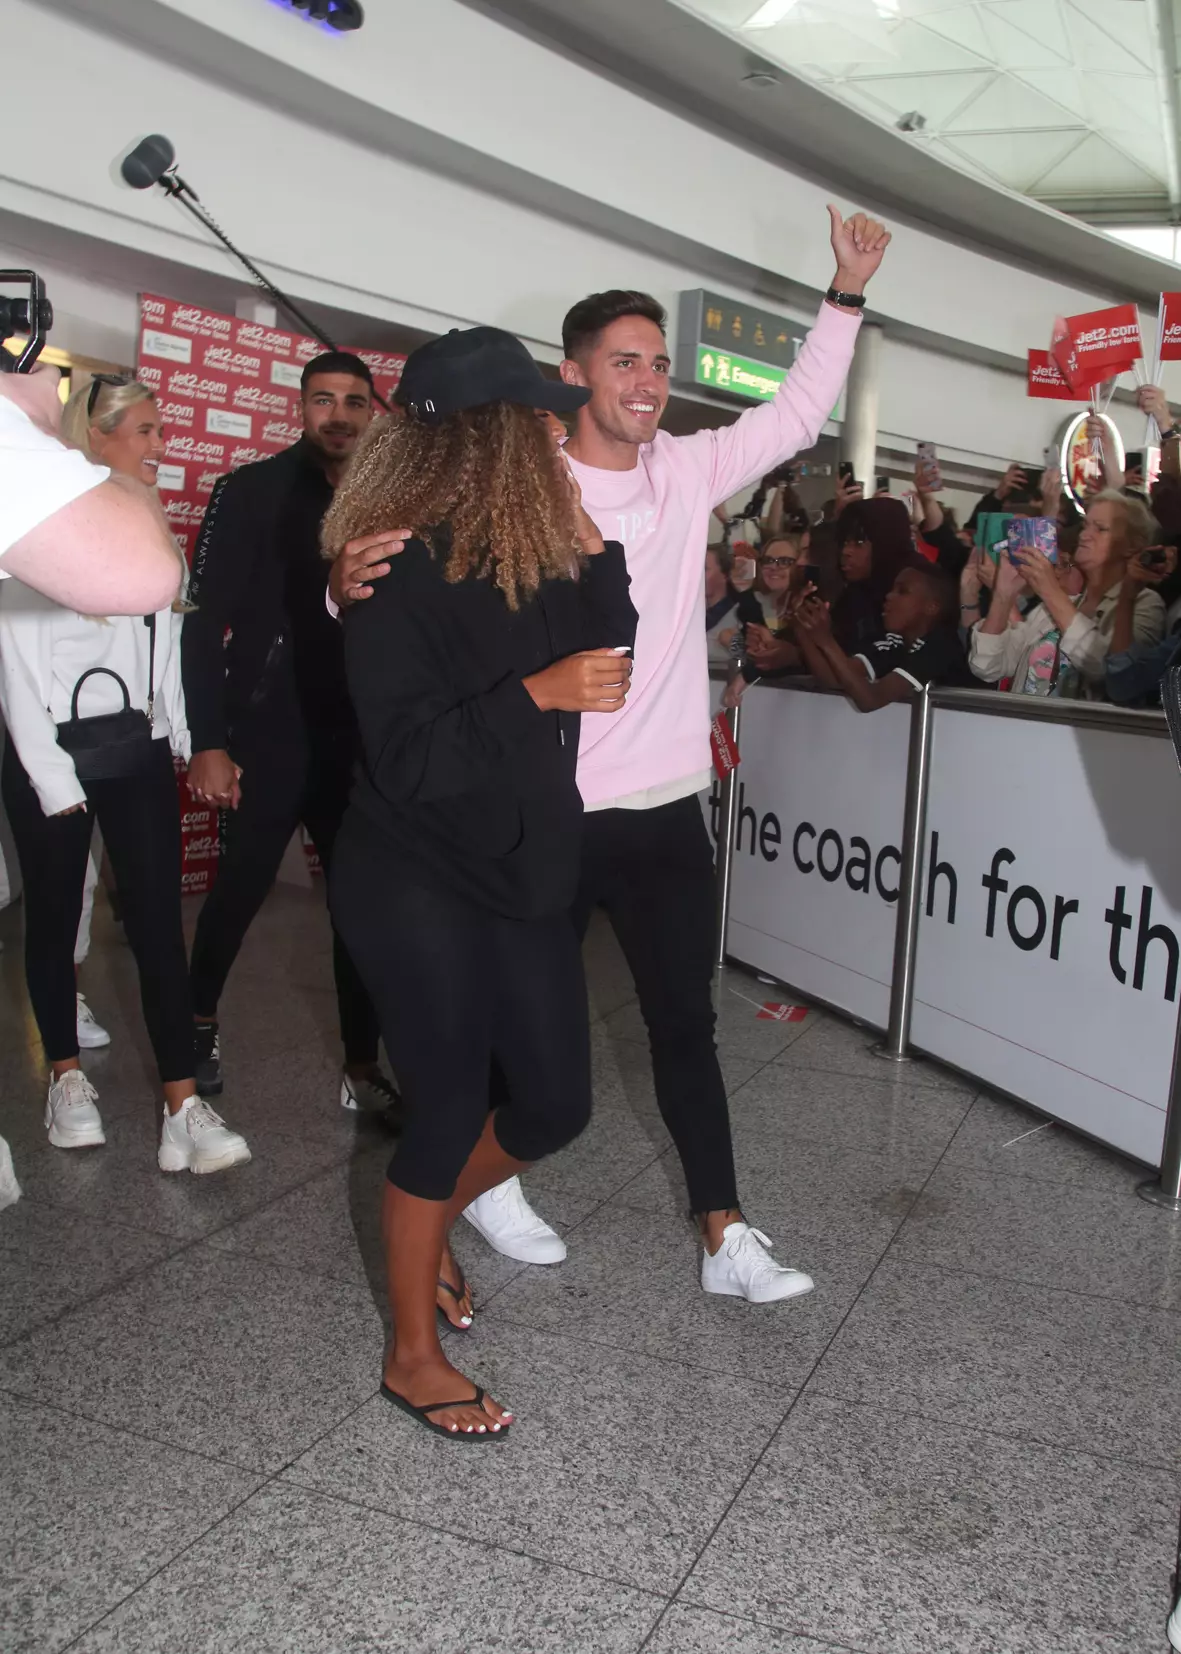 The couple arrive at Stansted Airport (